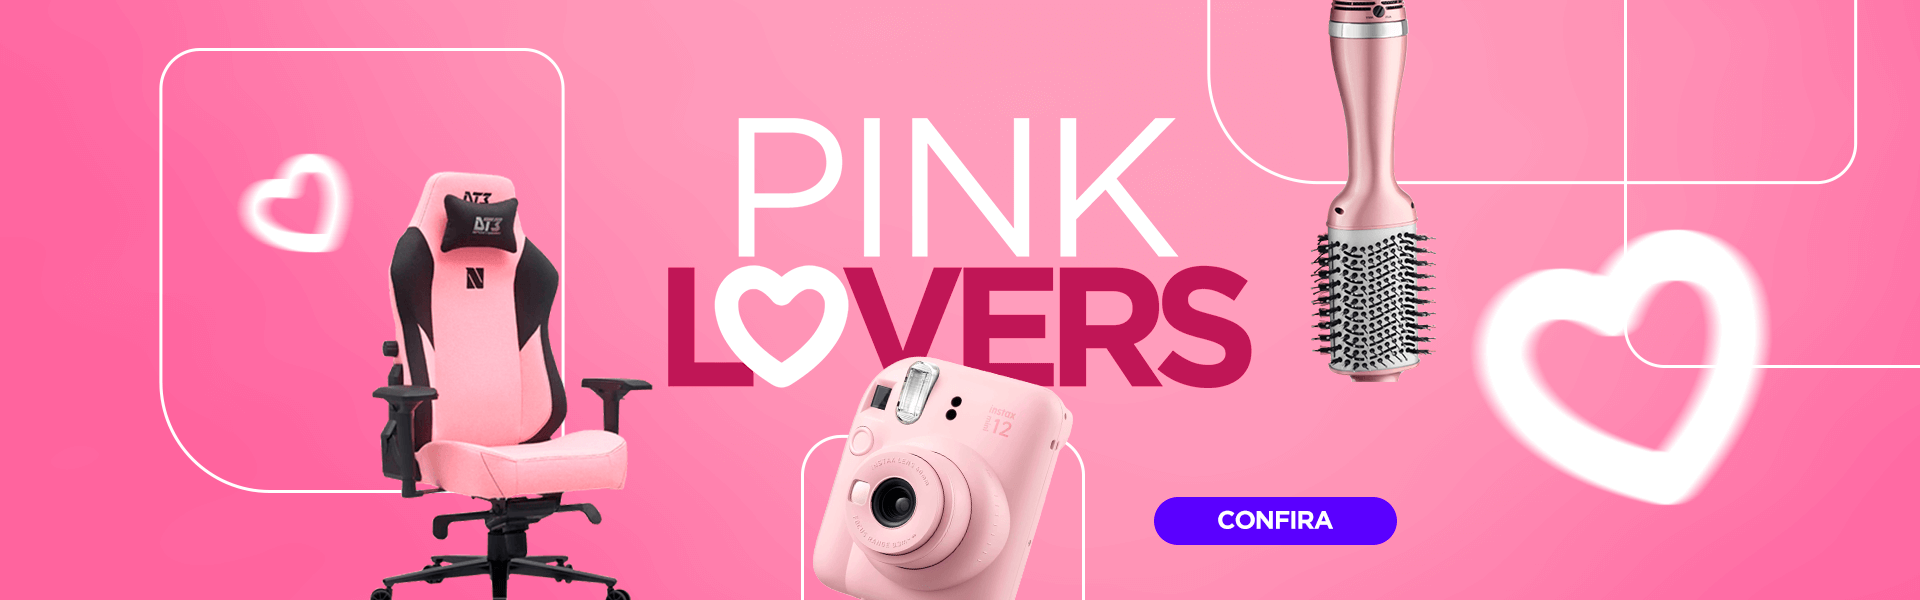 Pink lovers